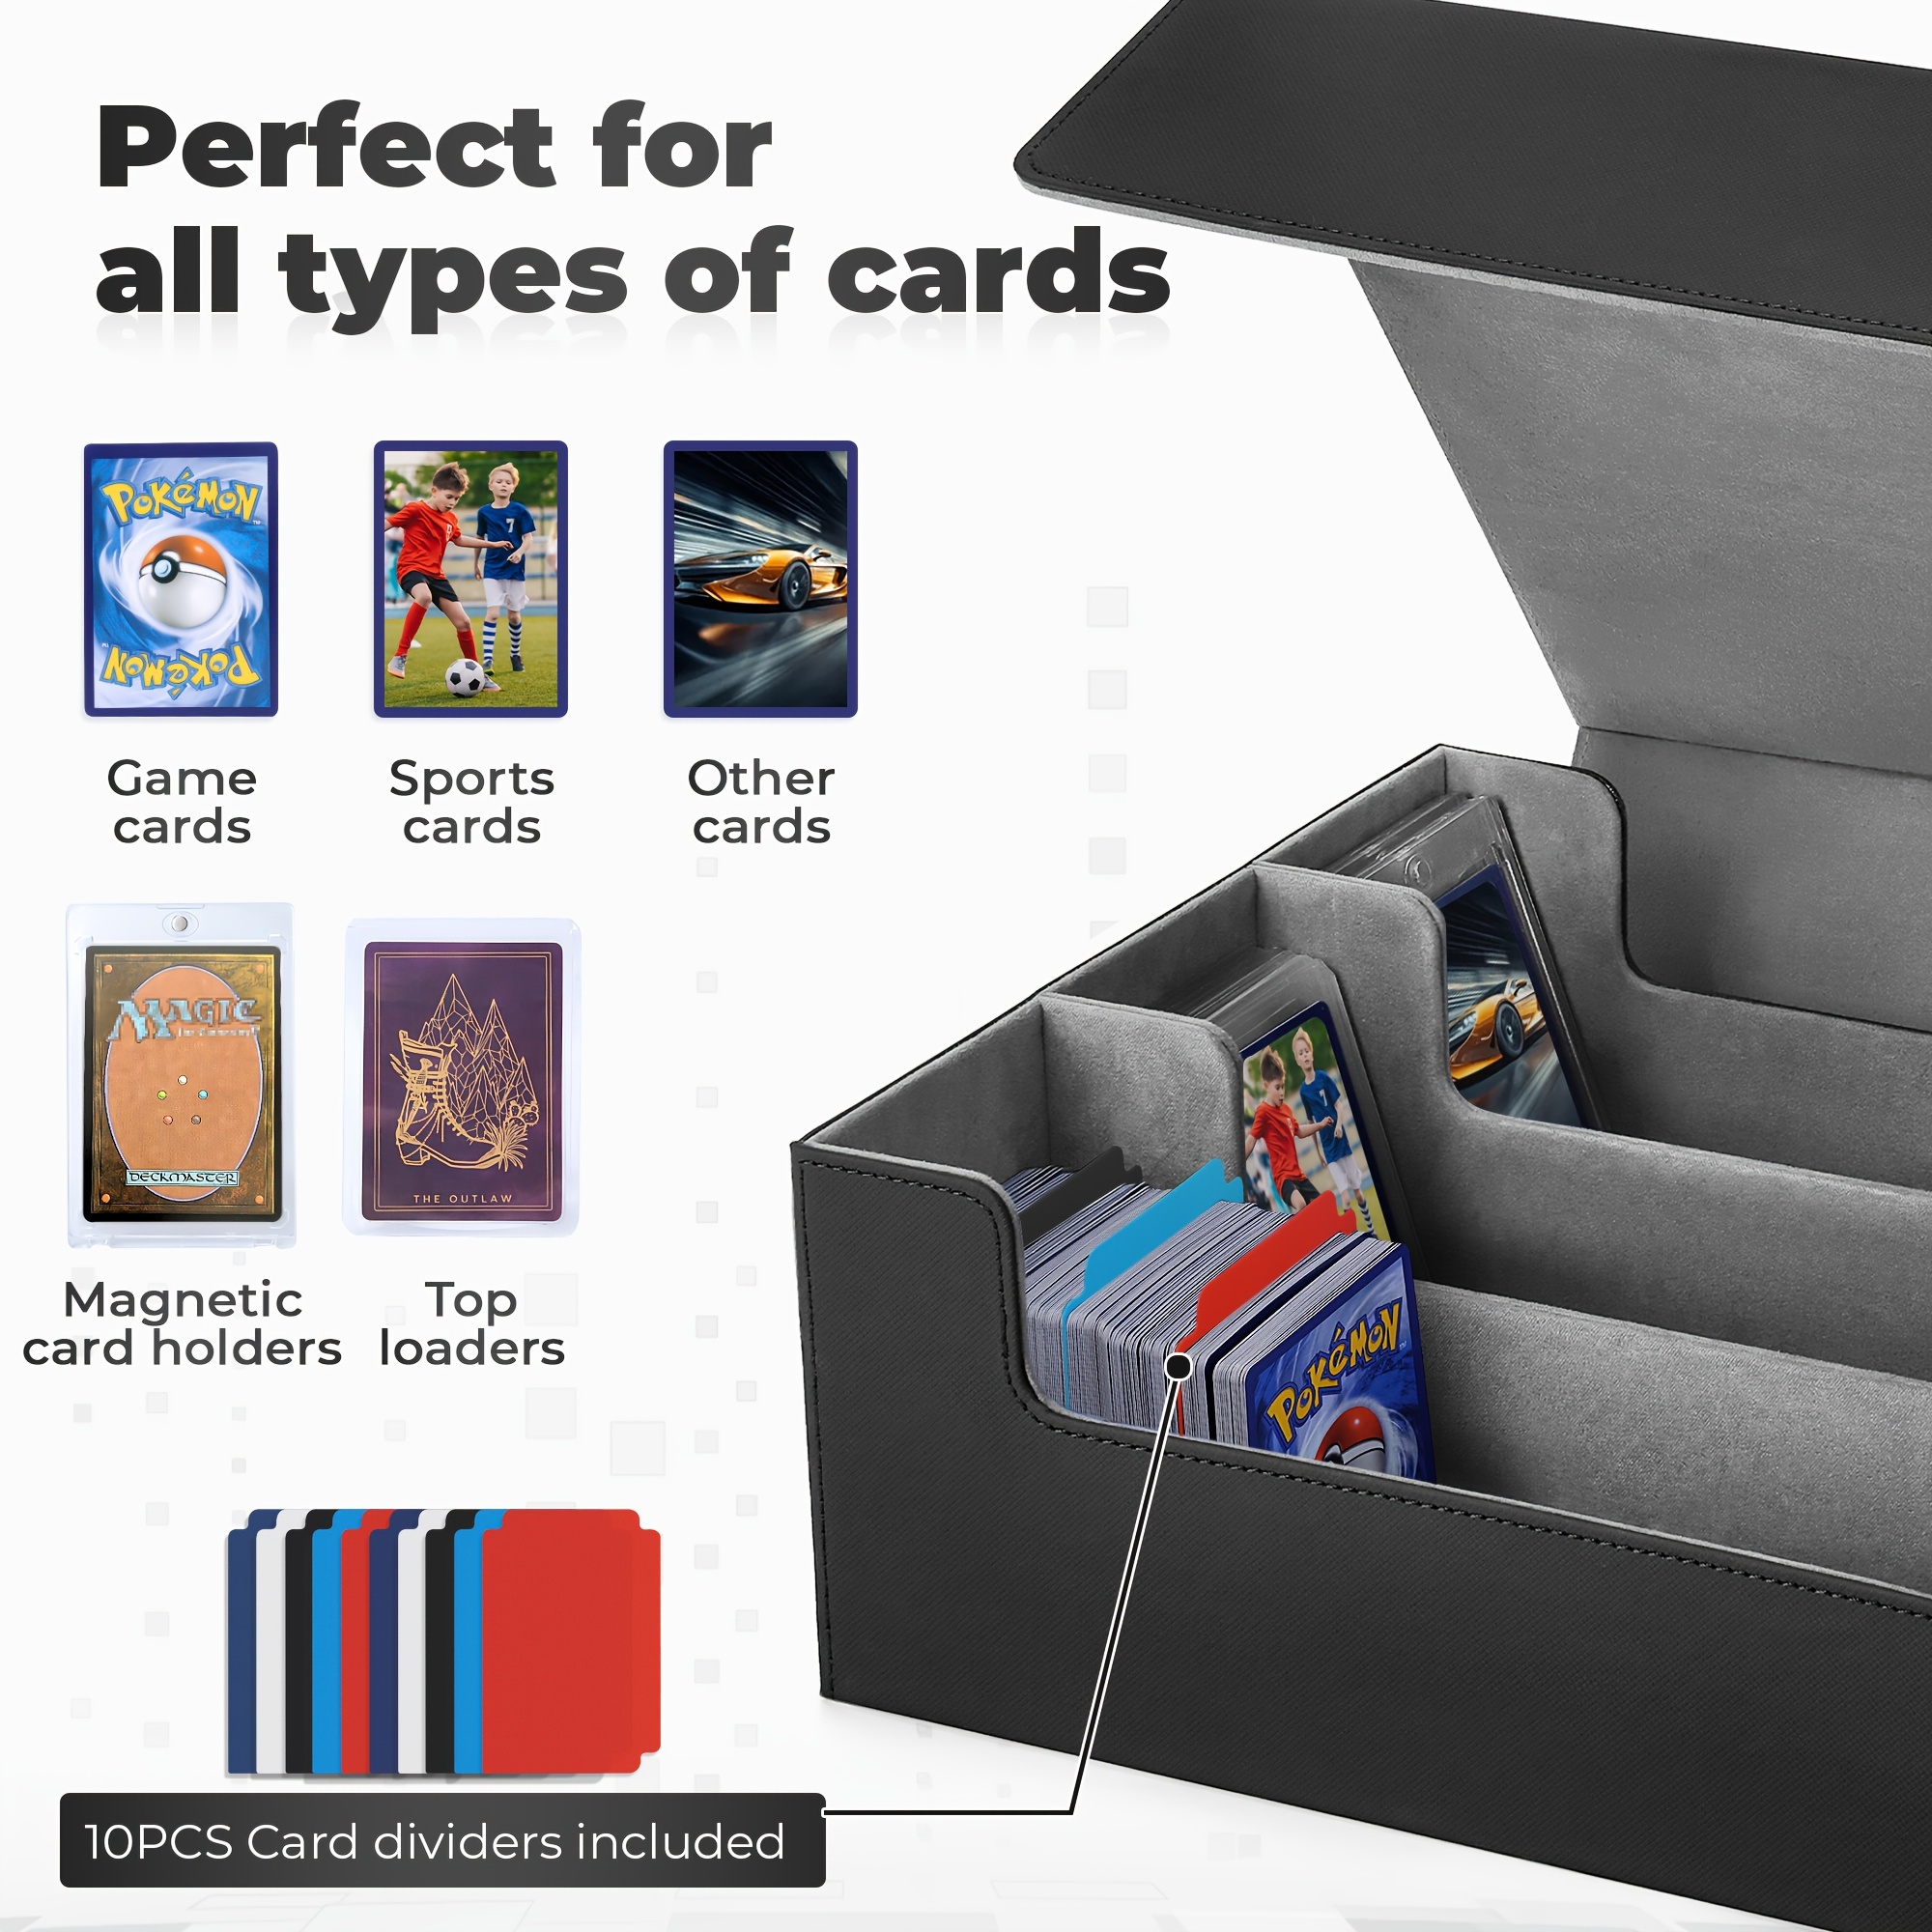 

Card Deck Case For Trading Cards 1800+, Magnetic Card Holder Storage Box, Card Deck Storage Box, Toploader Storage Box, Card Storage Box Fit For Yugioh, Mtg, Tcg, Baseball Cards, Sport Cards